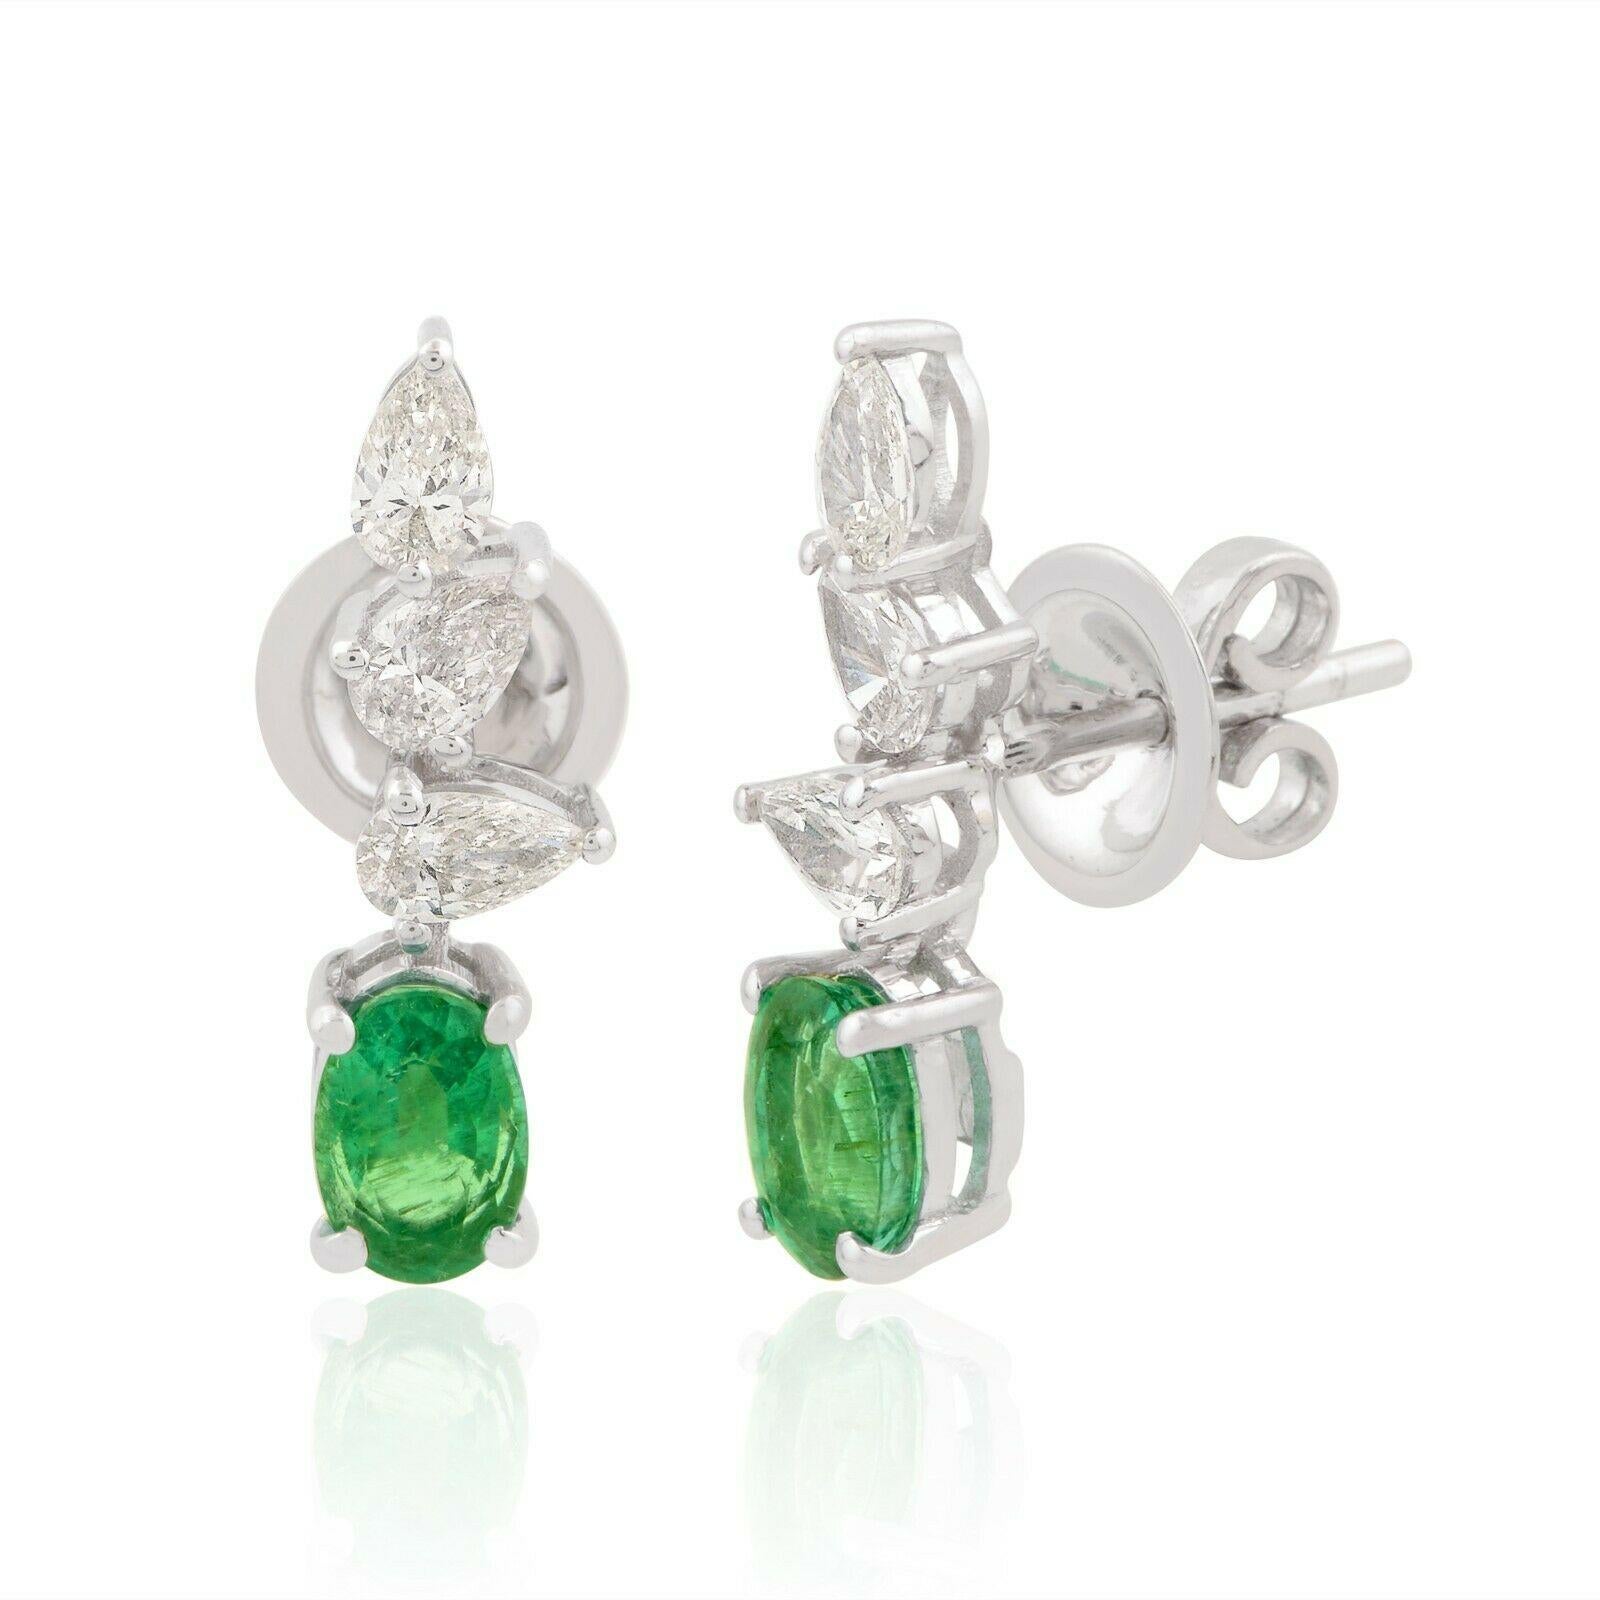 Cast in 14-karat gold, these beautiful earrings are hand set with 1.14 carats of emerald and .66 carats of sparkling diamonds. 

FOLLOW  MEGHNA JEWELS storefront to view the latest collection & exclusive pieces.  Meghna Jewels is proudly rated as a